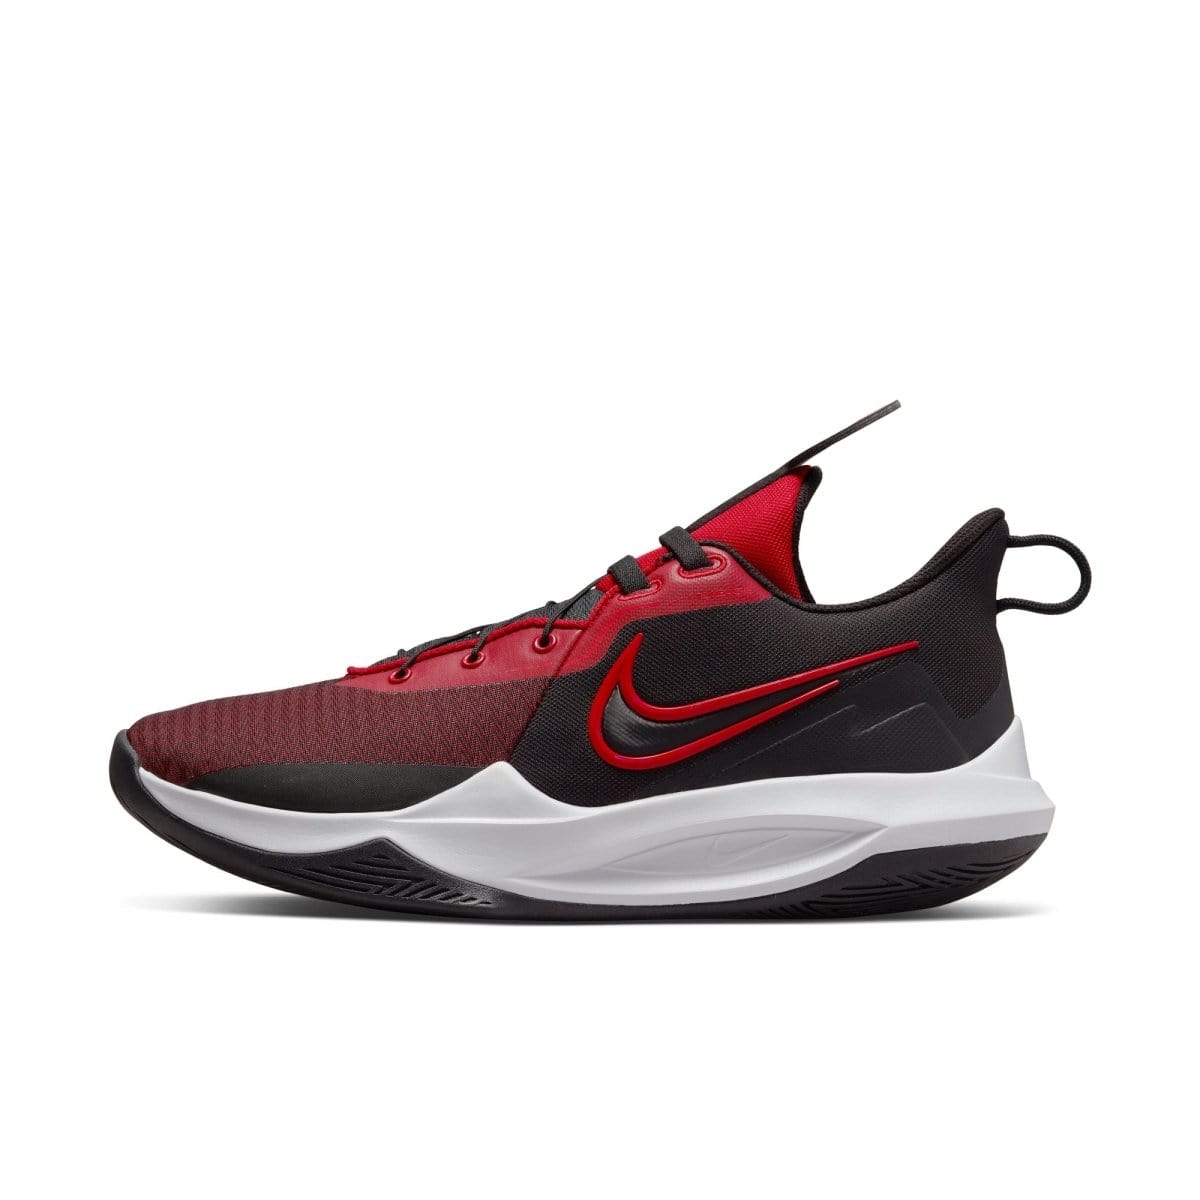 Nike NIKE MEN'S PRECISION 6 FLYEASE BASKETBALL BLACK/RED SHOES - INSPORT